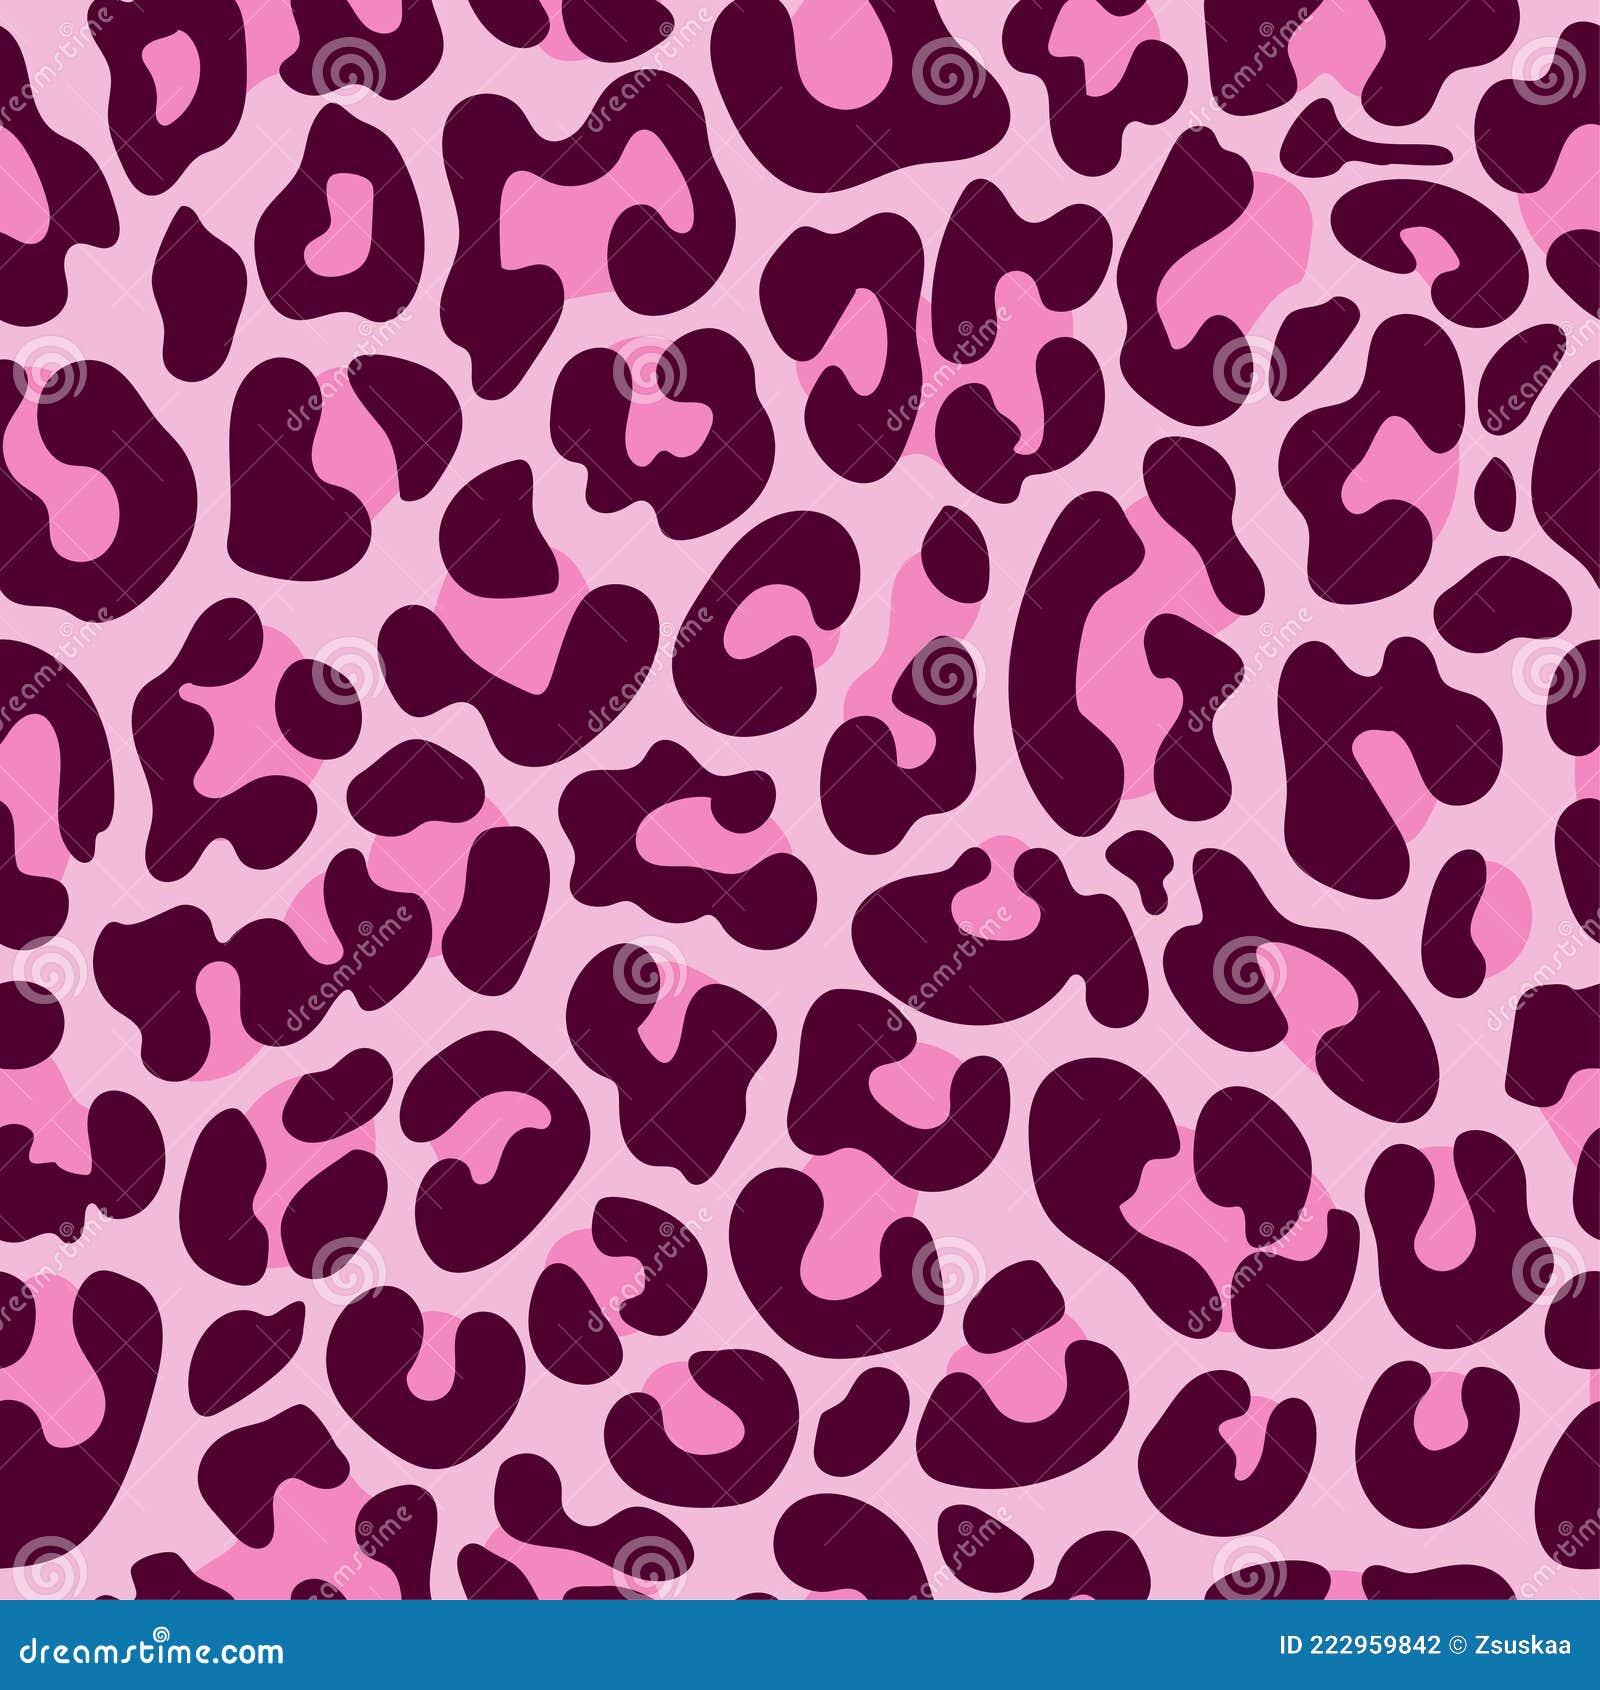 Leopard Pattern Design - Funny Drawing Seamless Pattern with Spots ...